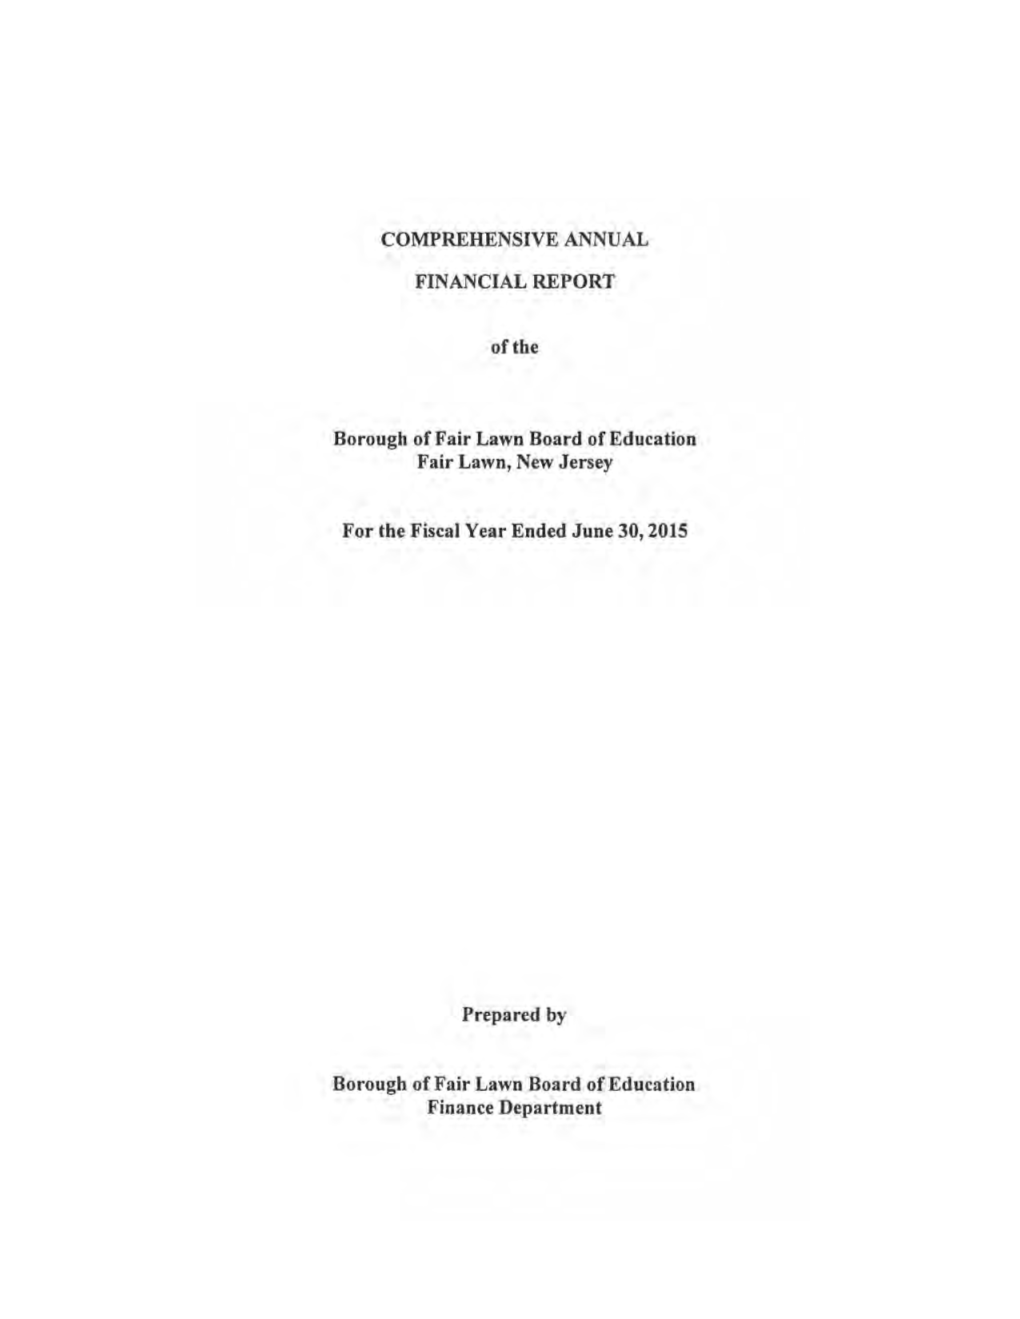 COMPREHENSIVE ANNUAL FINANCIAL REPORT of the Borough of Fair Lawn Board of Education Fair Lawn, New Jersey for the Fiscal Year E